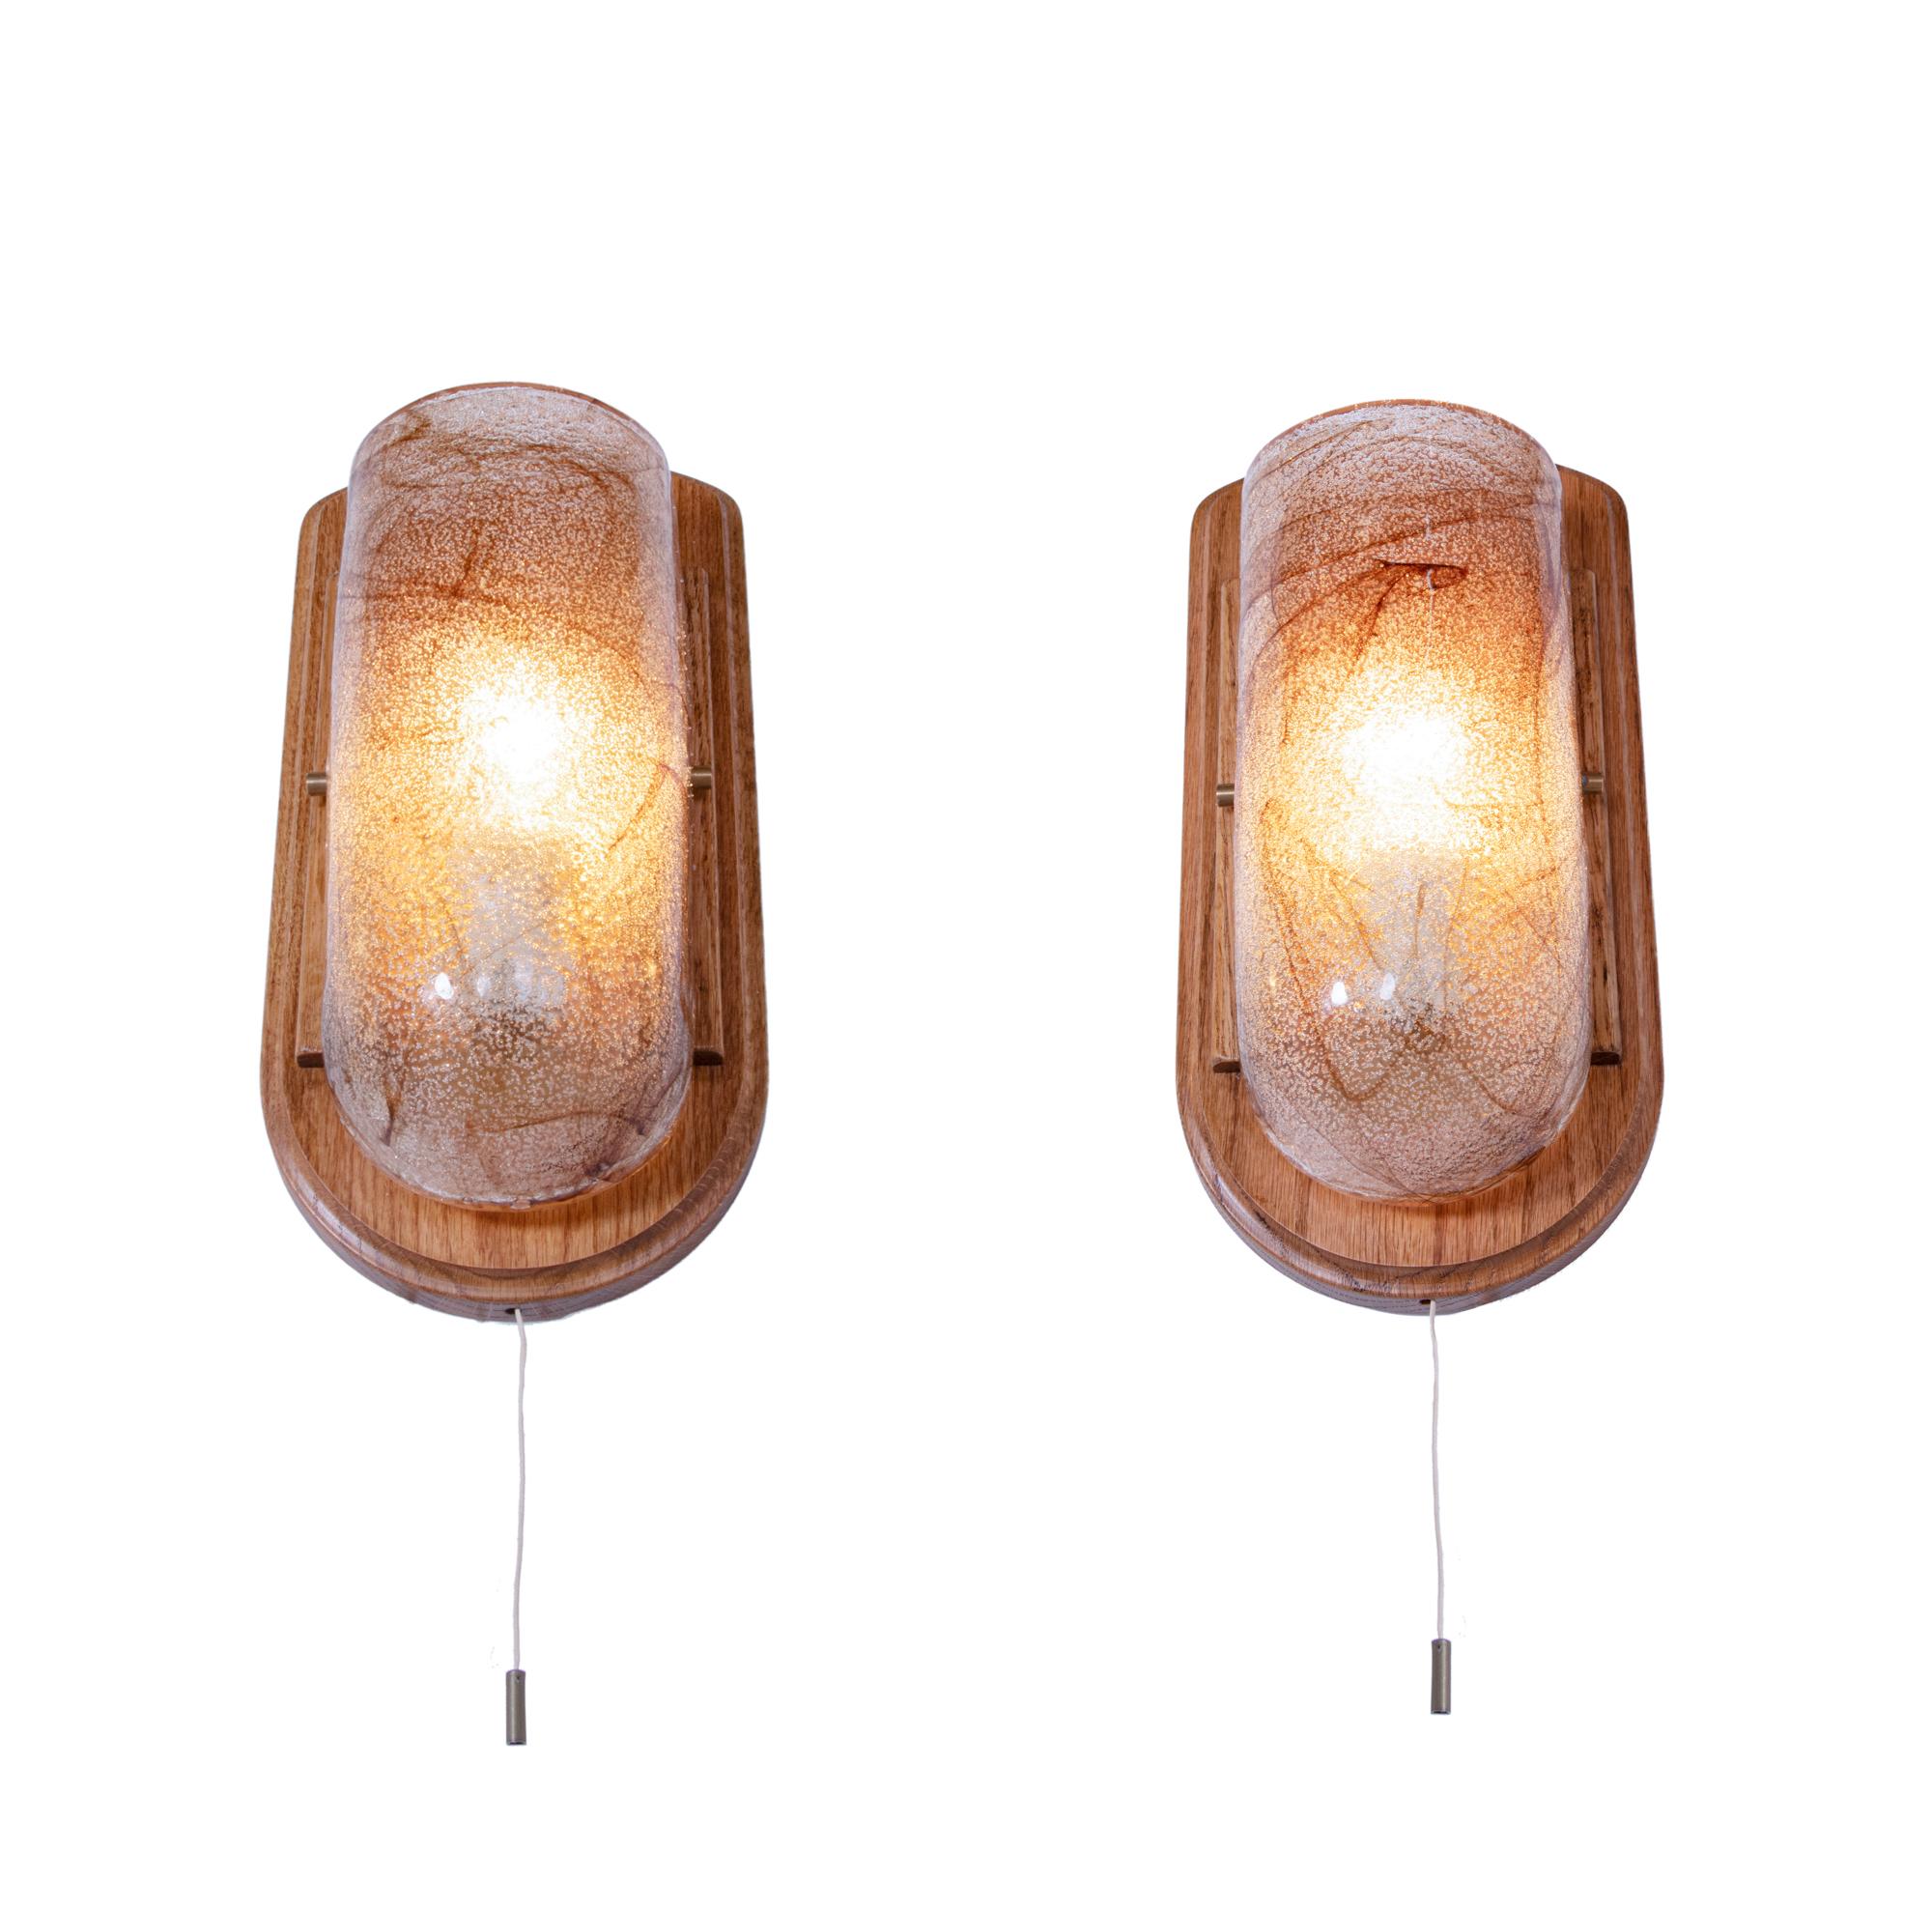 Hand-Crafted '1 (of 2)' Pair of Modernist Wall Sconces Amber Murano Glass, Germany 1960s For Sale